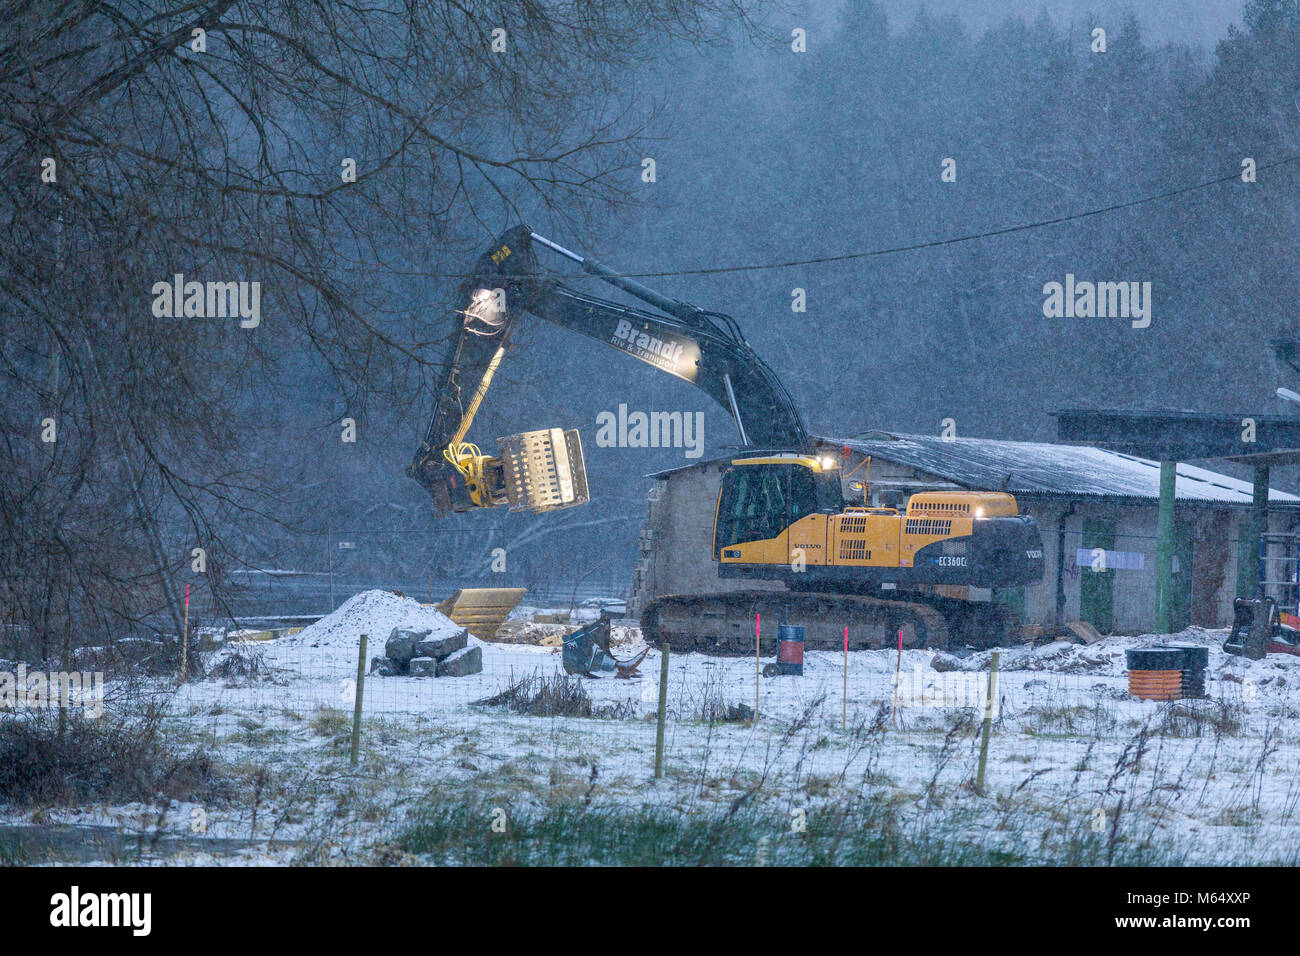 FLODA, SWEDEN - FEBRUARY 2 2018: Mobile articulated excavator working at building site during snowfall in winter  Model Release: No.  Property release: No. Stock Photo